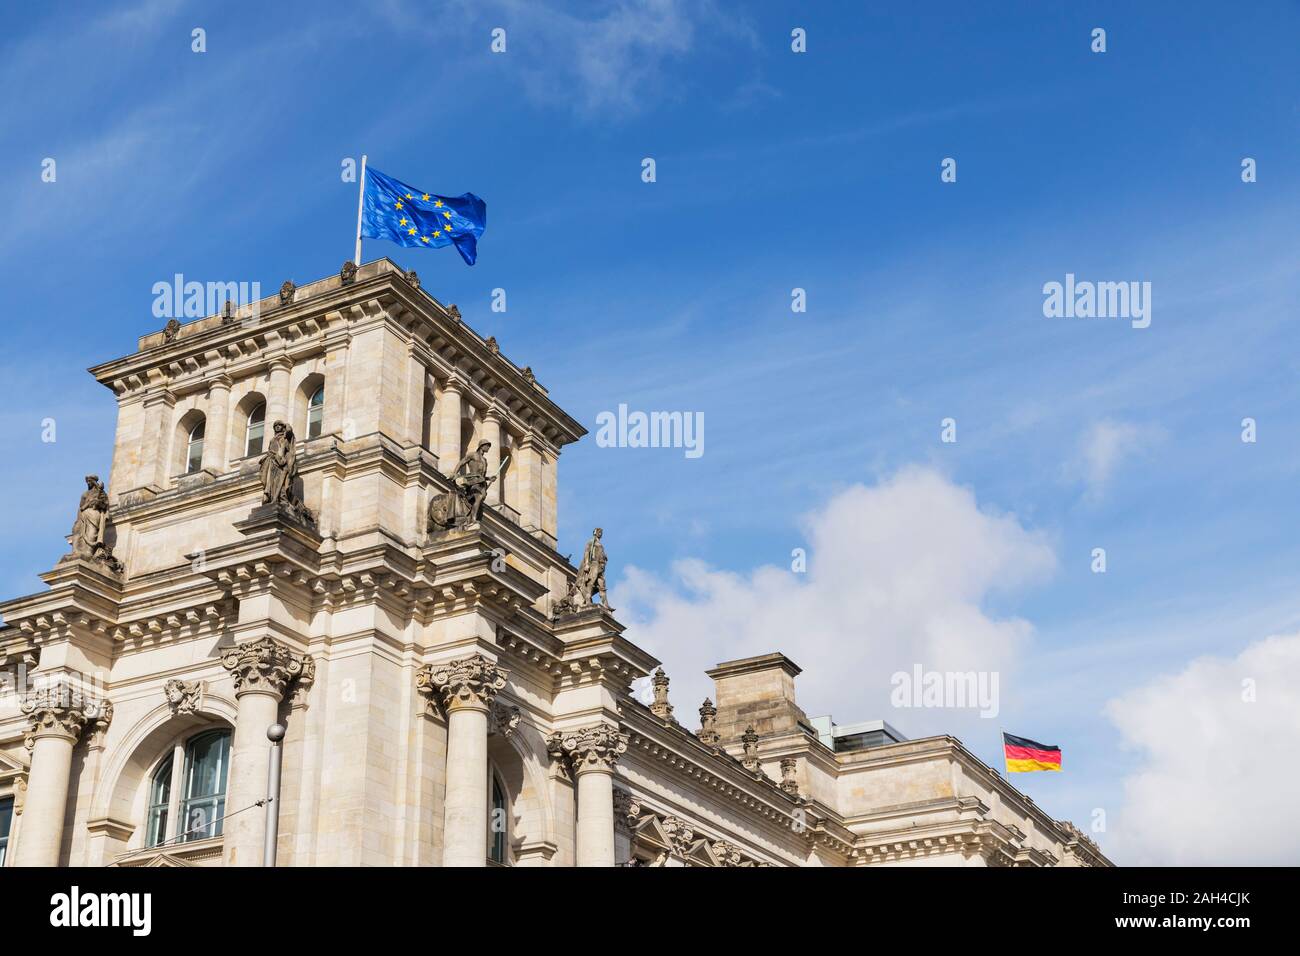 Germany, Berlin, European Union and German flags on top of Reichstag building Stock Photo